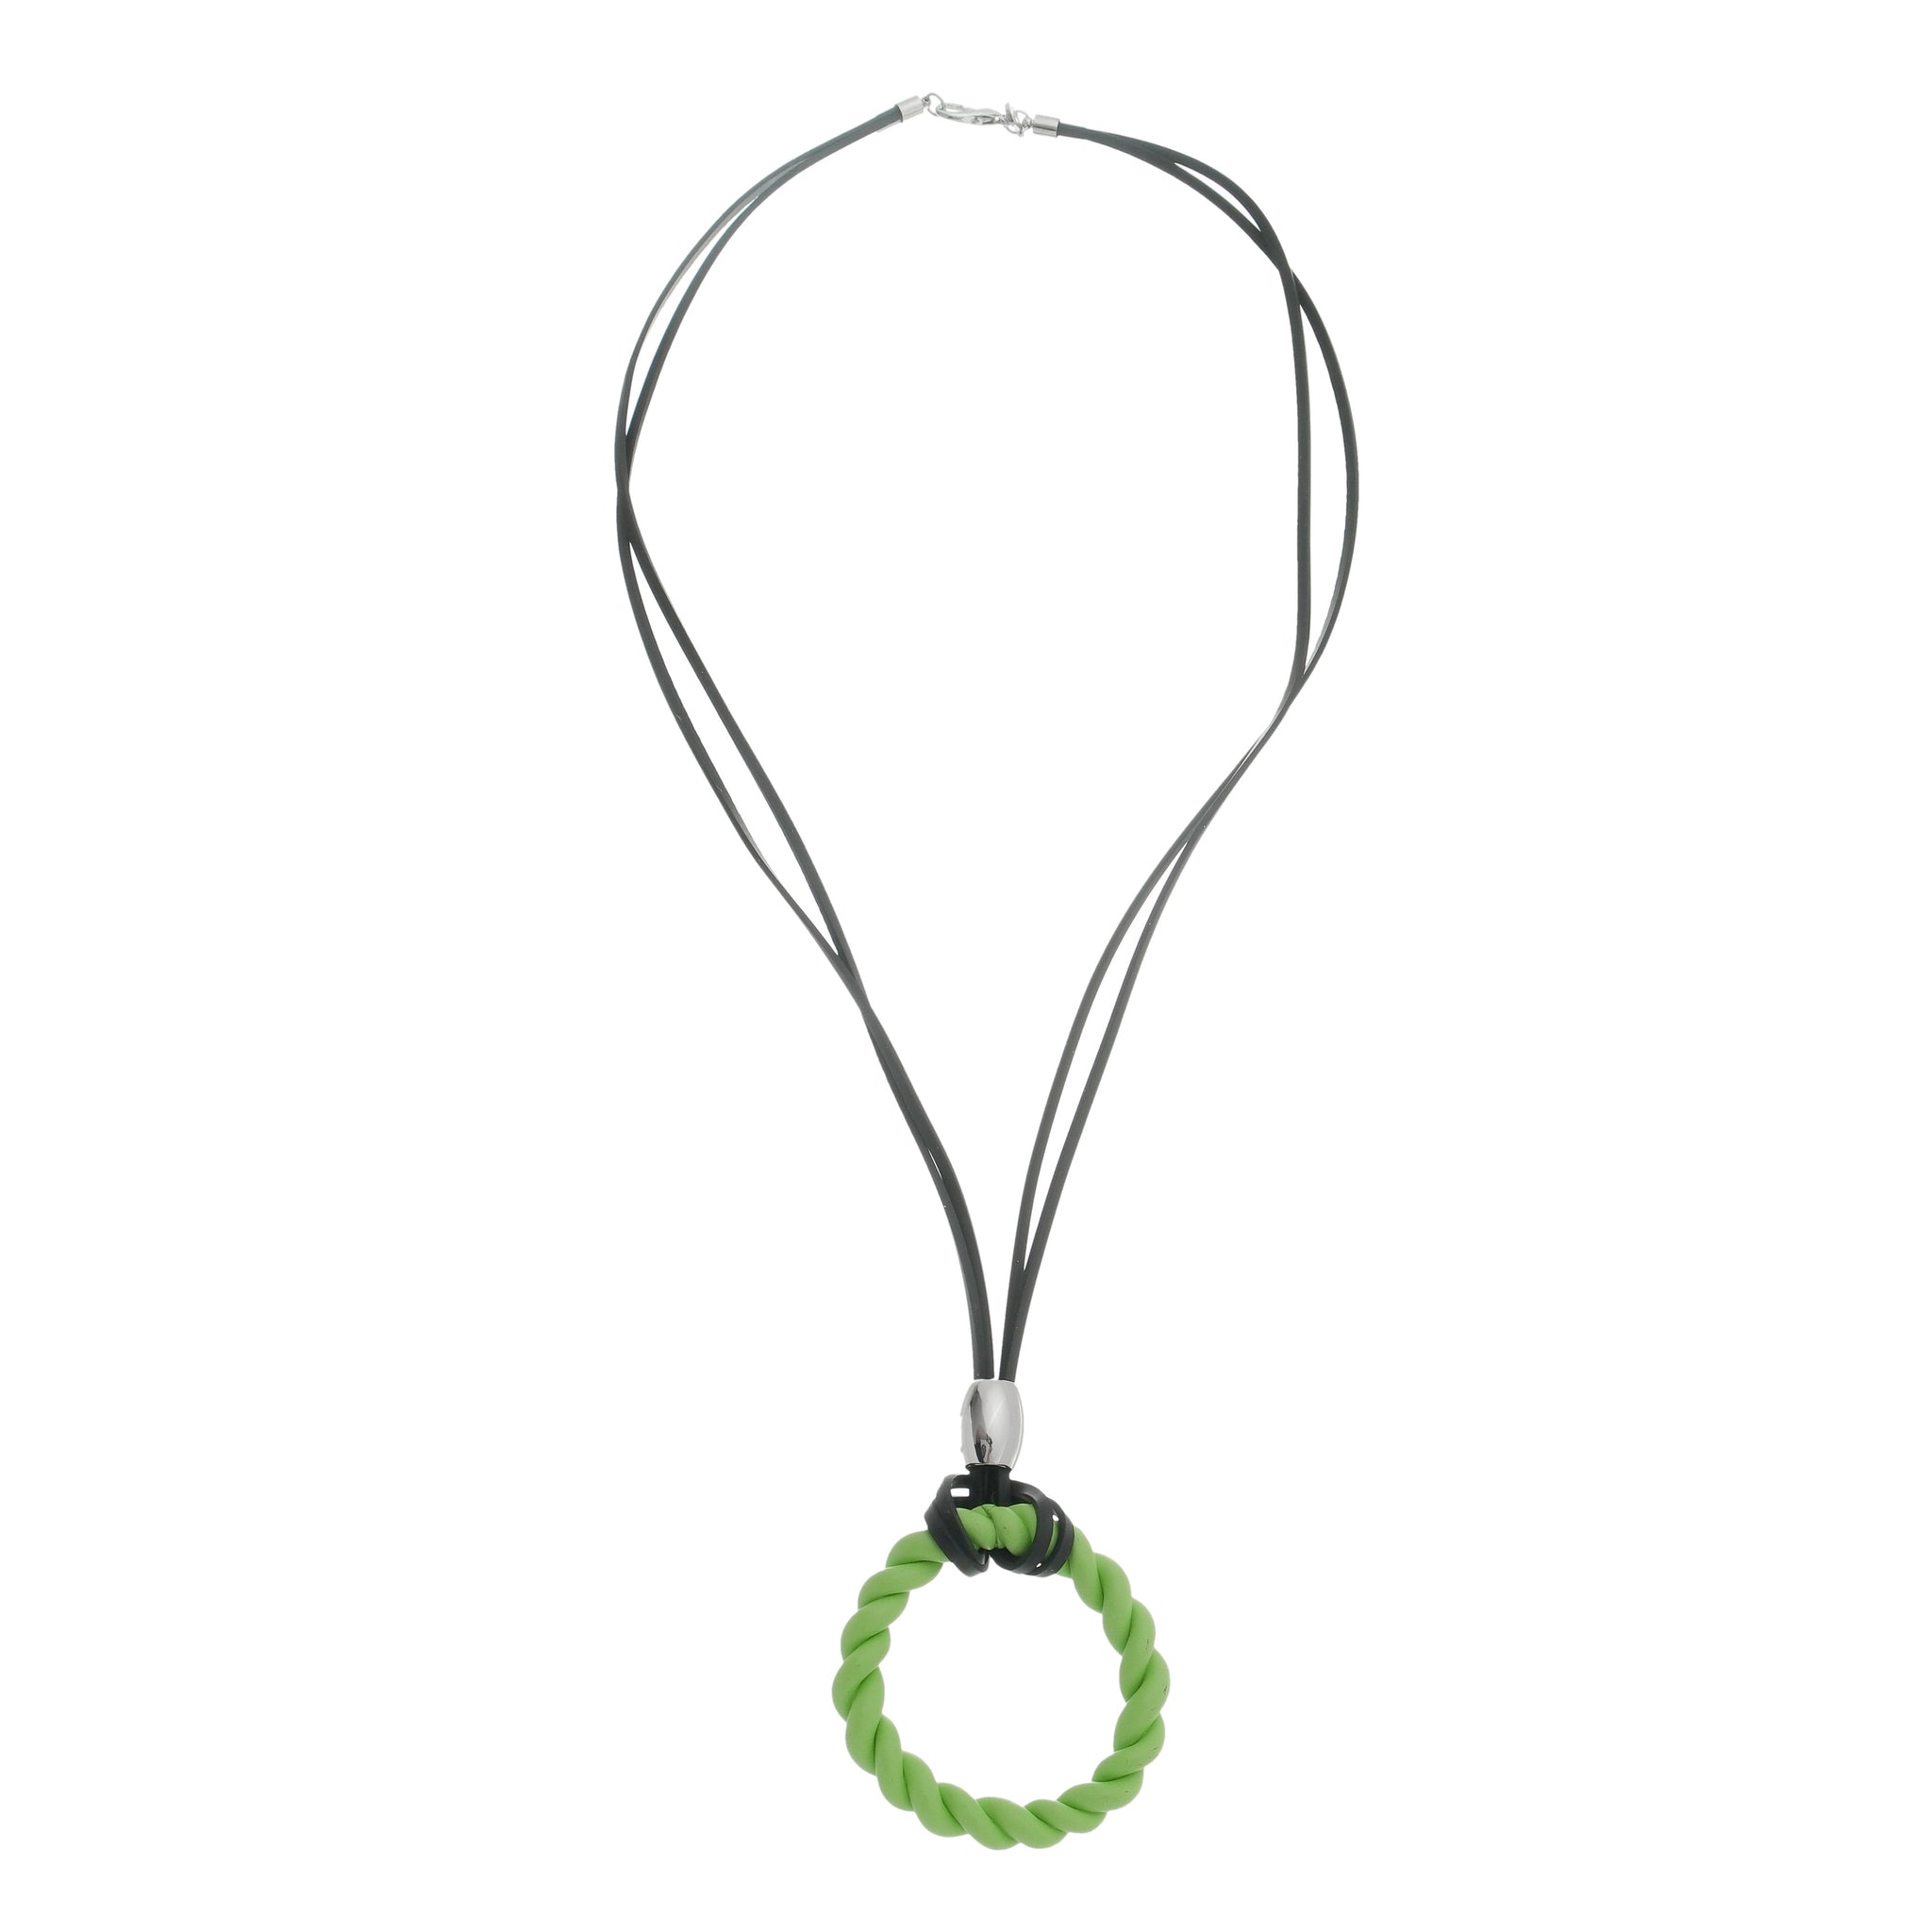 Spiral Ring Necklace - Green